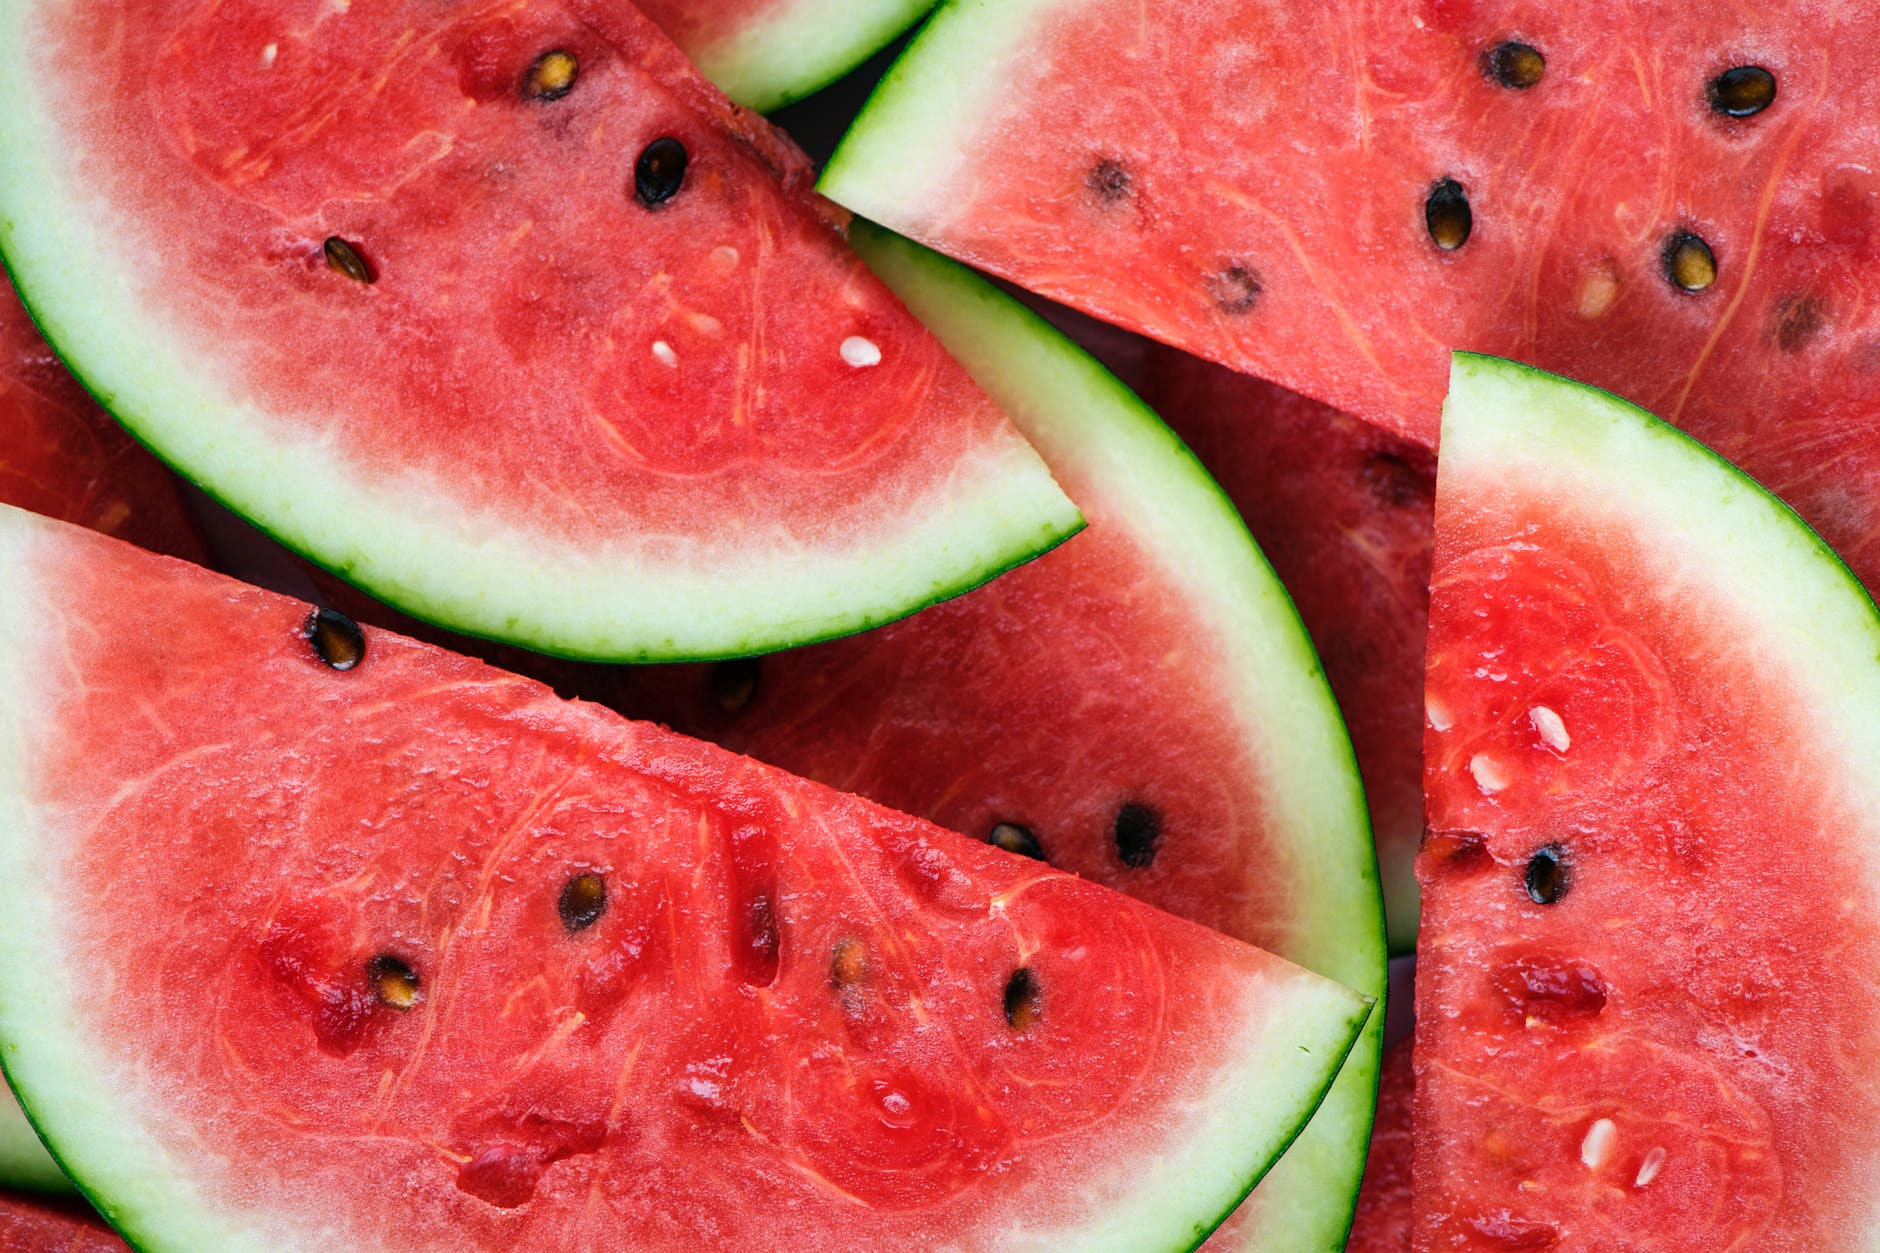 Lidl Raises Watermelon Price In Hungary After Criticism